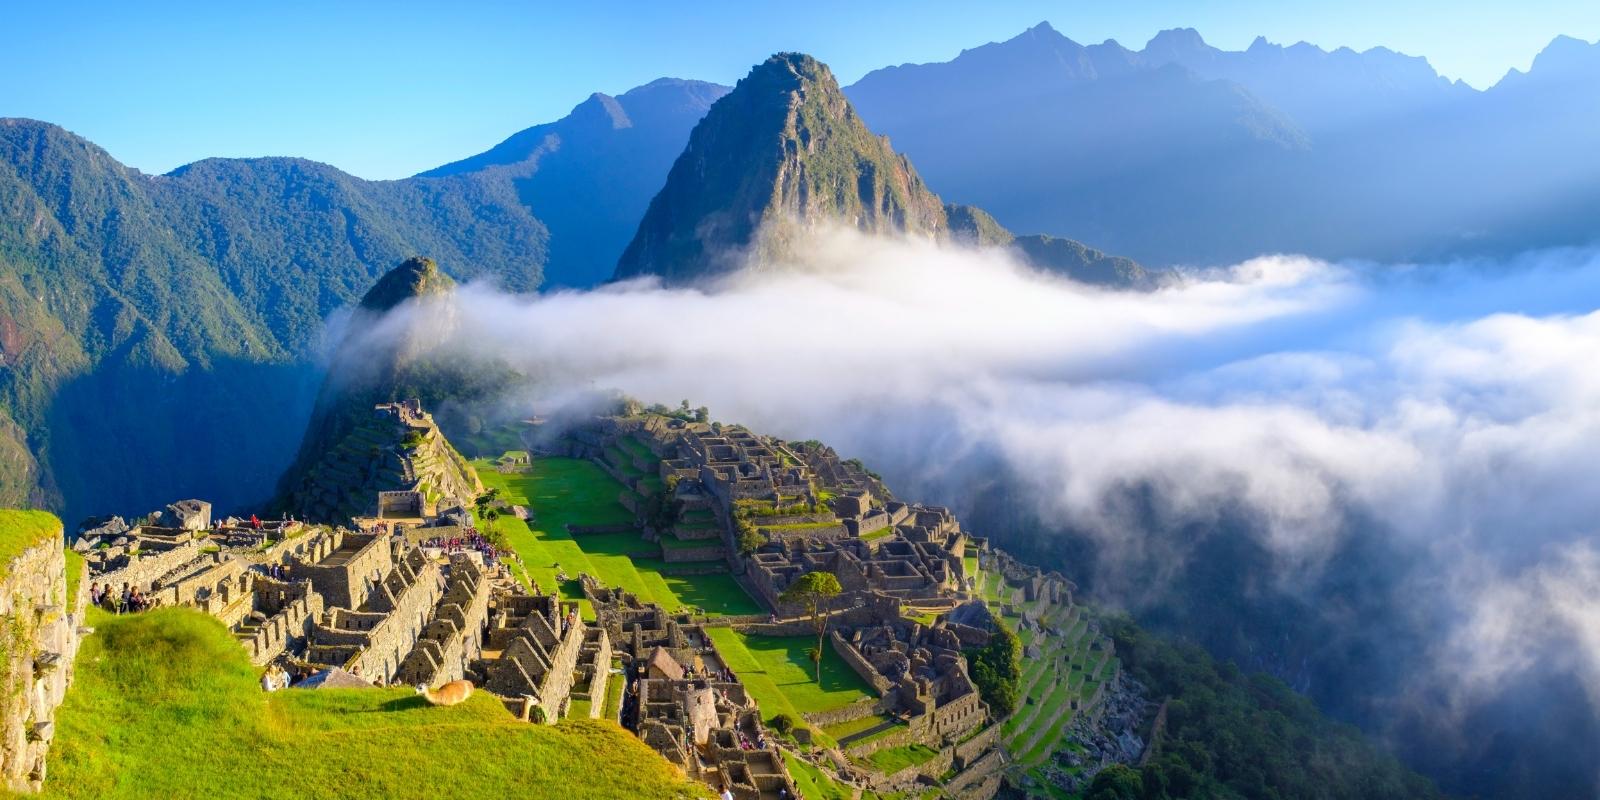 HOW MUCH MONEY SHOULD I TAKE TO THE SHORT INCA TRAIL HIKE